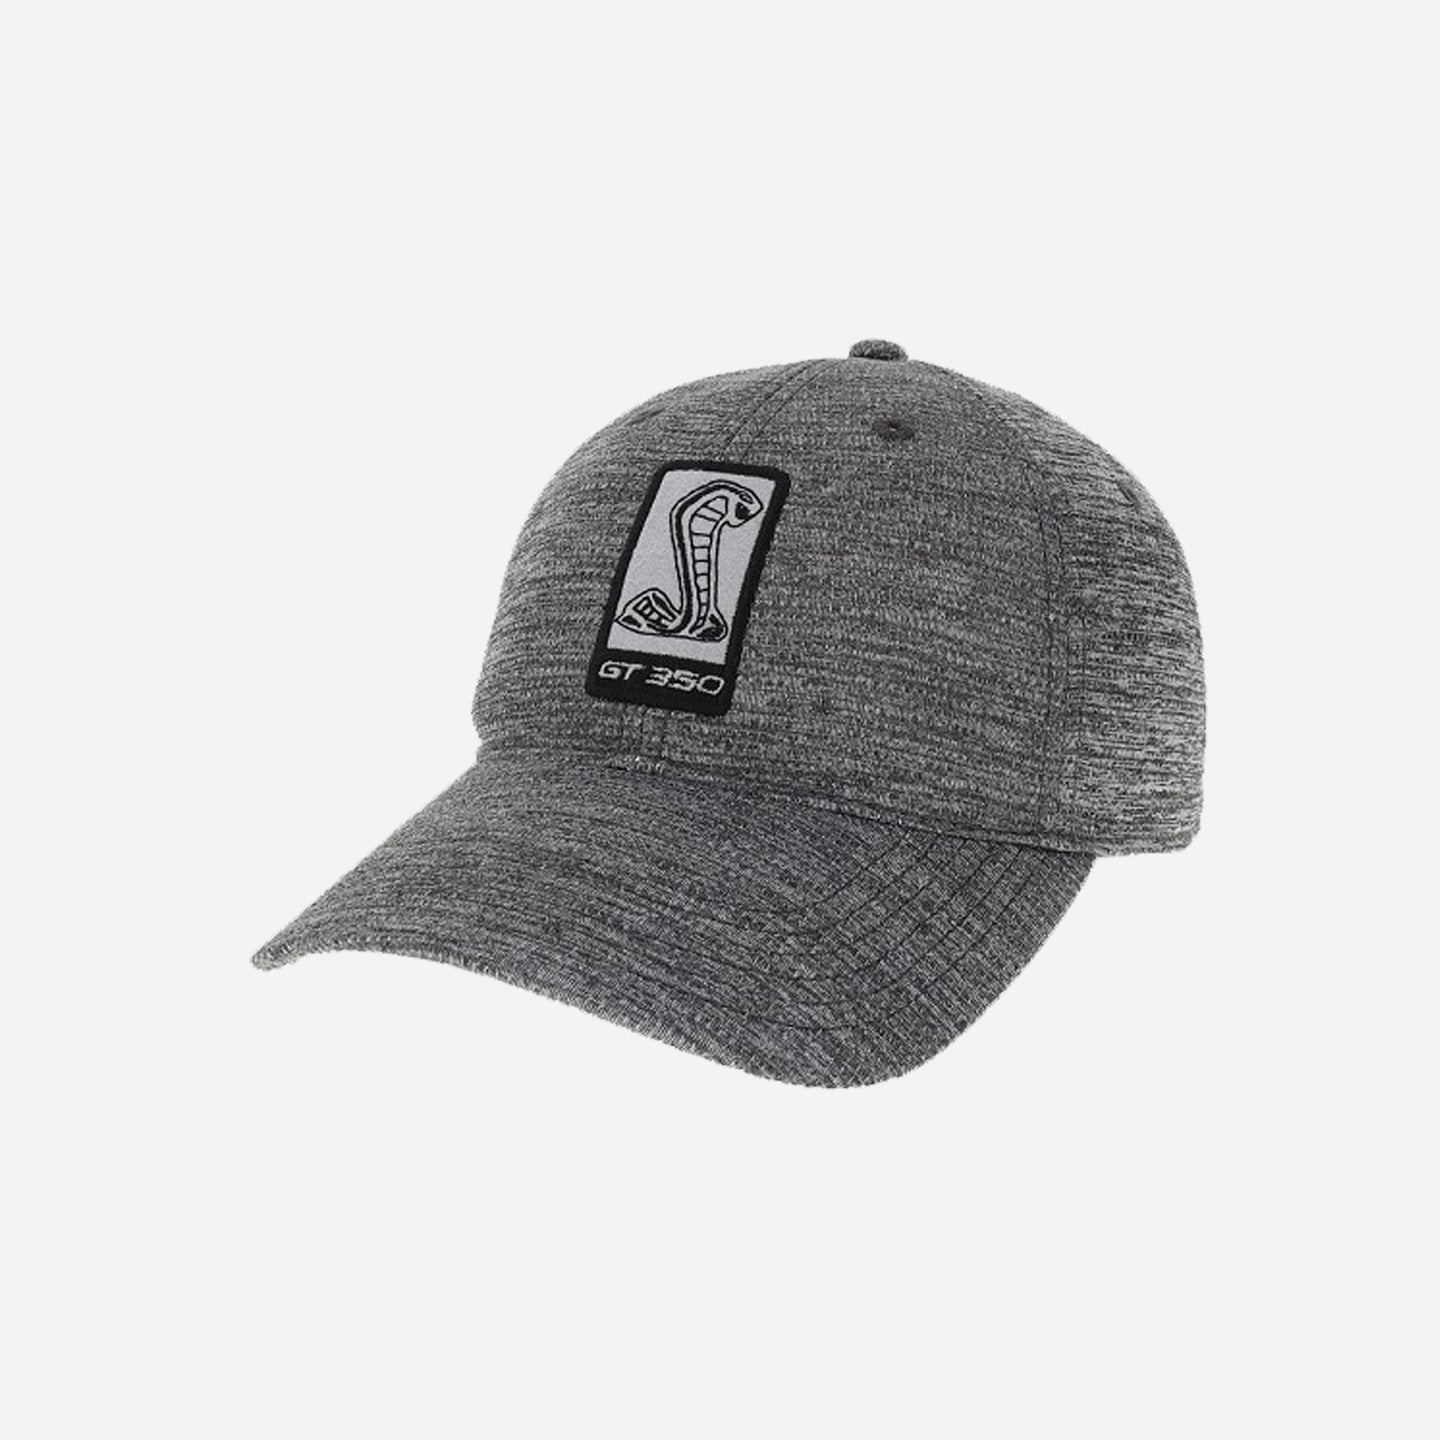 Shelby GT350 Cool Fit Hat / Gray